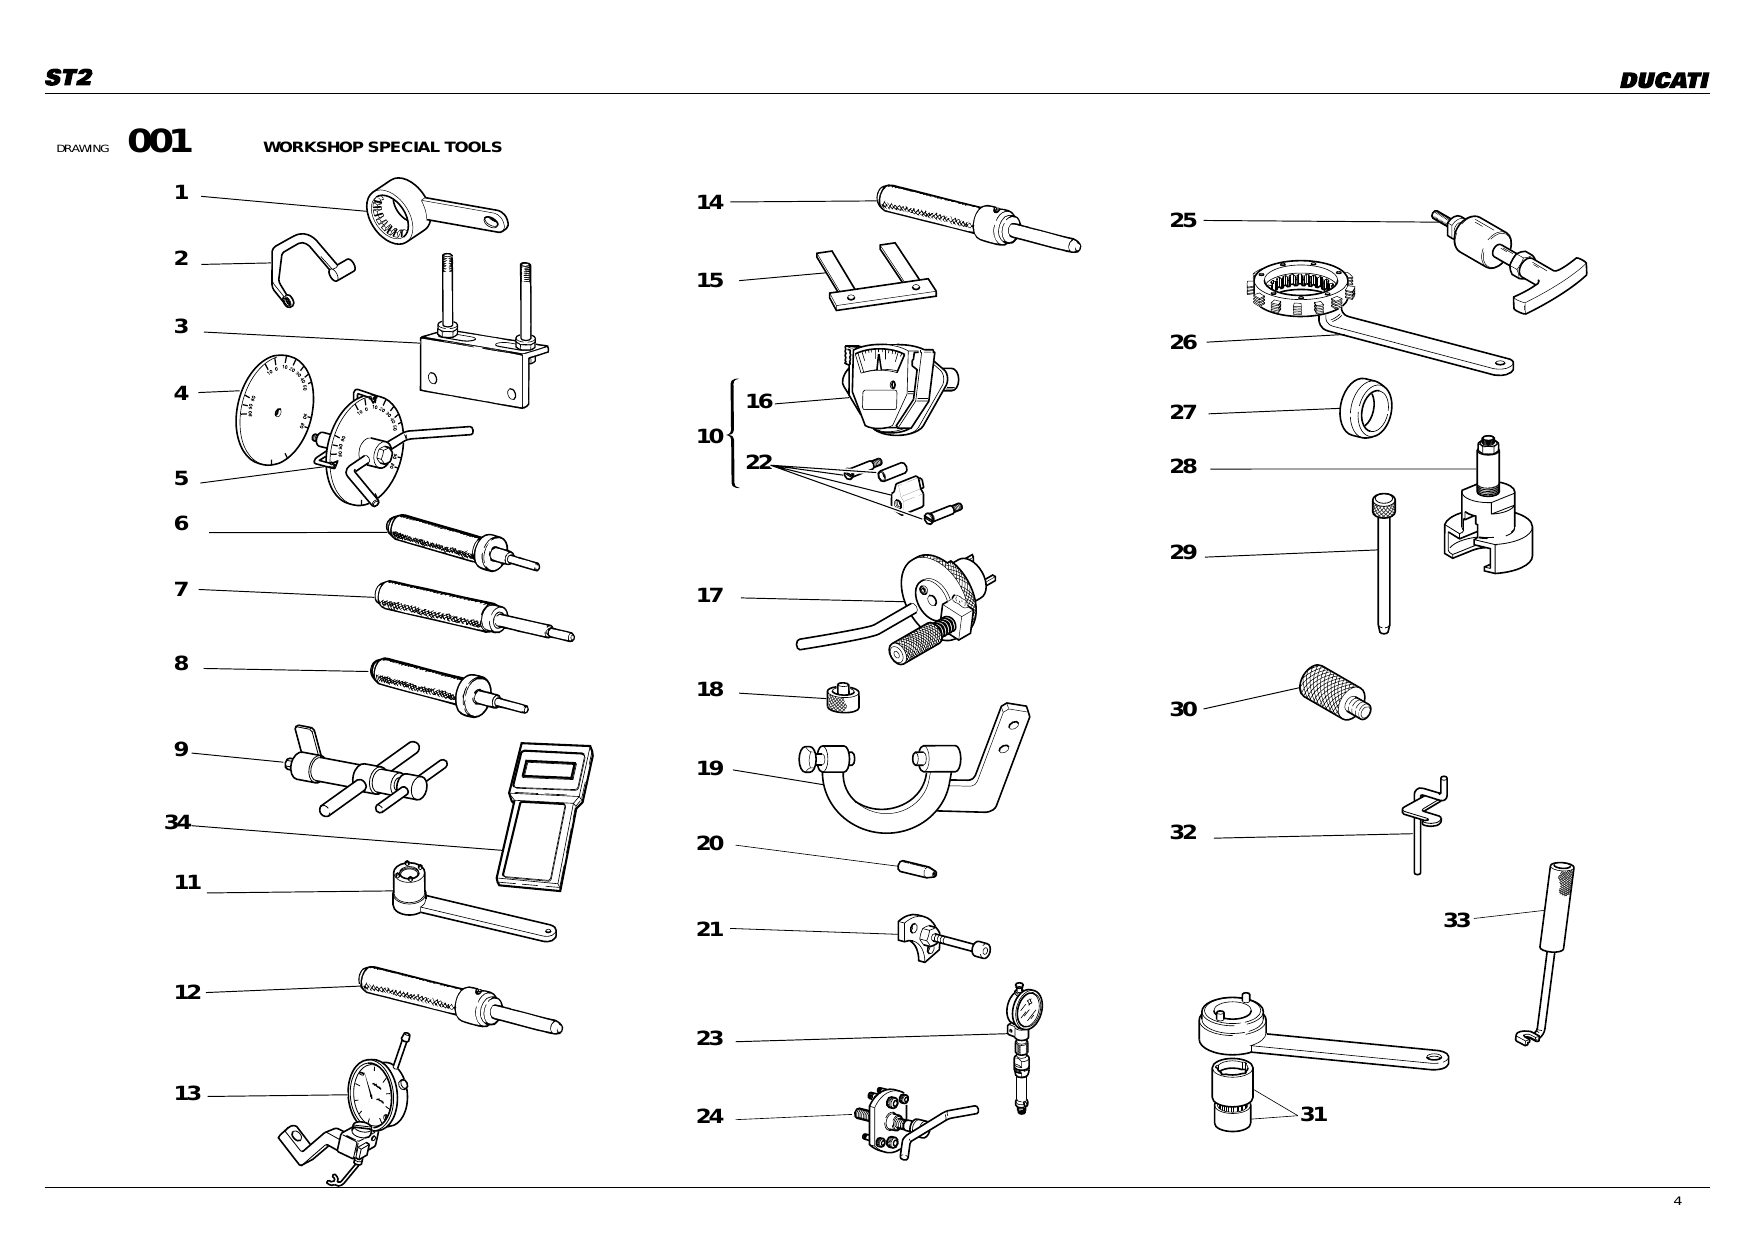 2000-2003 Ducati ST2 parts catalog and assembly manual Preview image 4